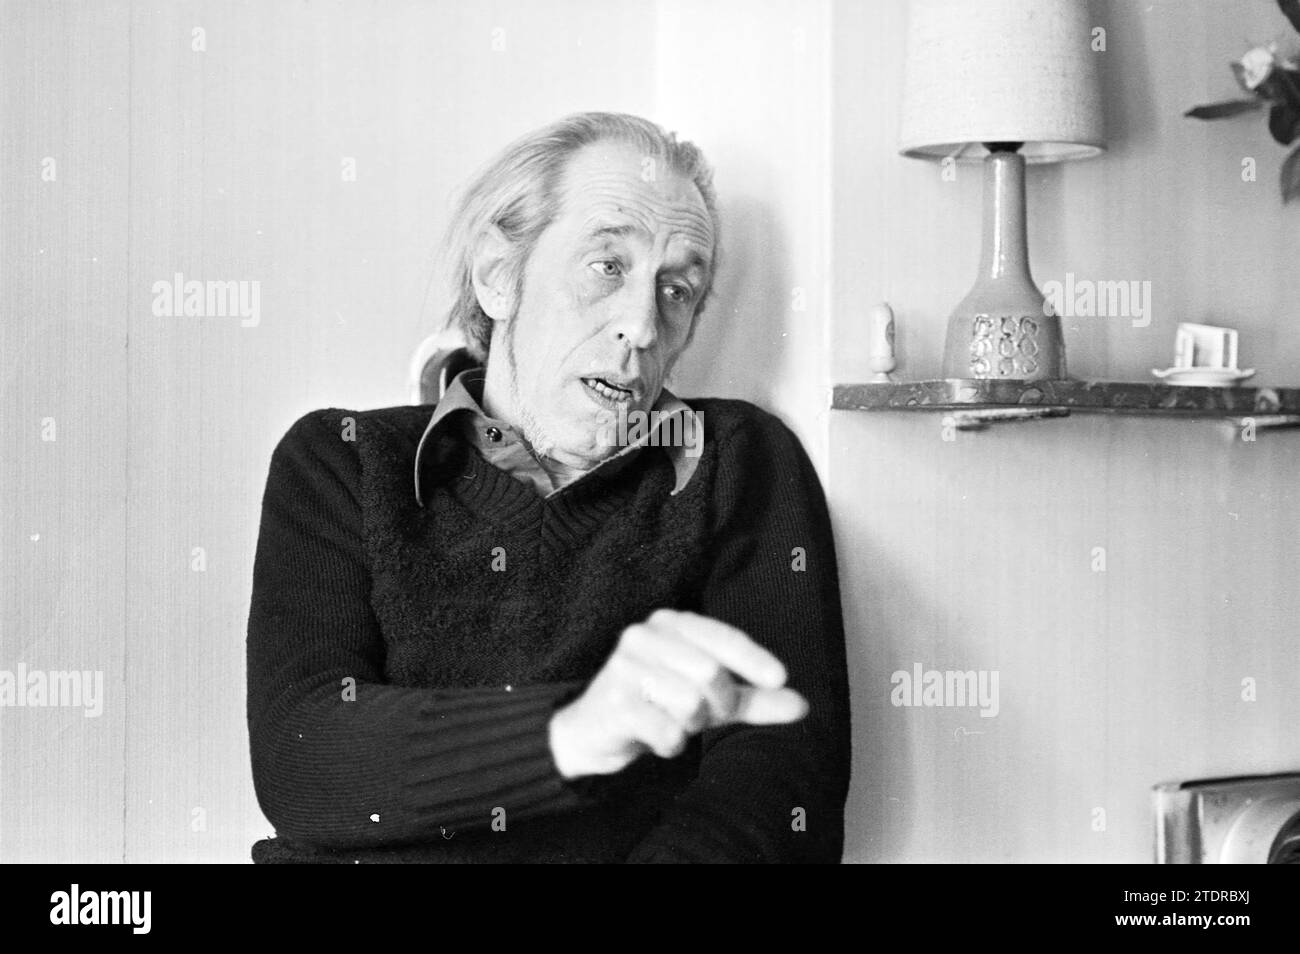 Portrait of Mr Heeze, ex-journalist of the Vrije Volk, Portraits, Portraits, 20-05-1975, Whizgle News from the Past, Tailored for the Future. Explore historical narratives, Dutch The Netherlands agency image with a modern perspective, bridging the gap between yesterday's events and tomorrow's insights. A timeless journey shaping the stories that shape our future Stock Photo